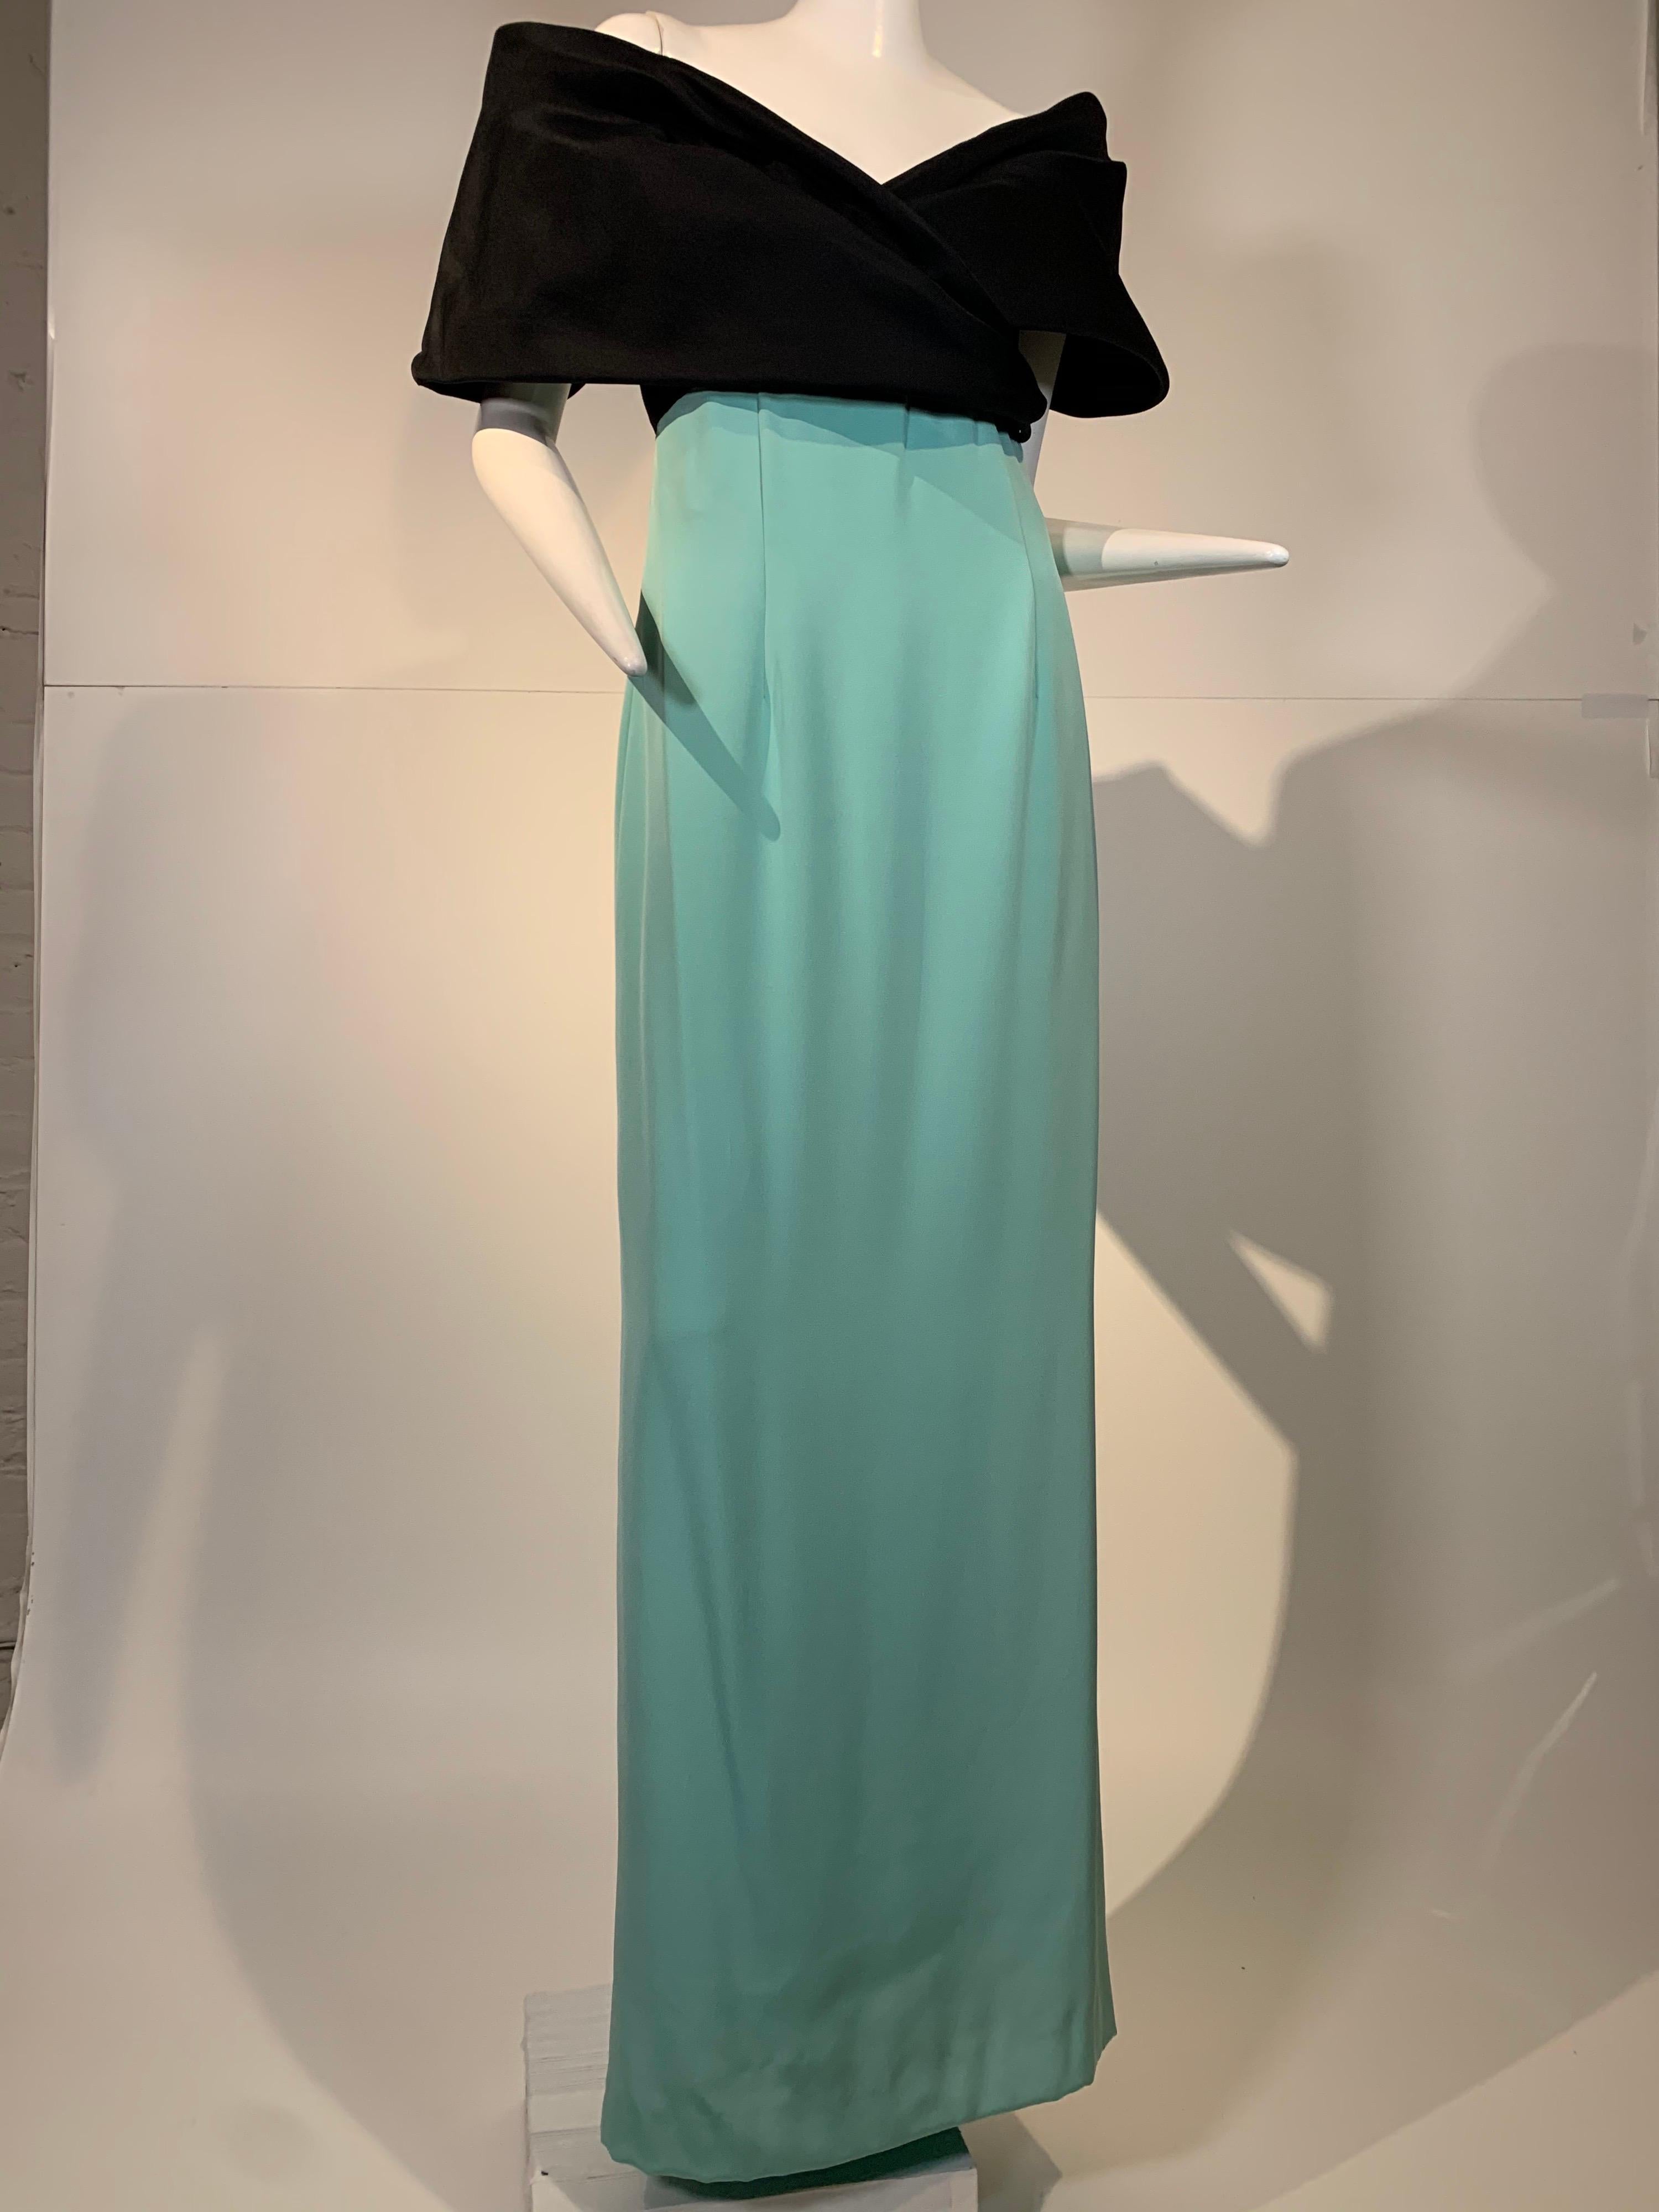 1980s Bill Blass mint crepe gown with black gazar wrap bodice and shoulders: sleeves and bodice give the illusion of a silk wrap about the shoulders and are wired for structure and volume. High Empire waist. Gown has a fishtail hemline. Size 8.